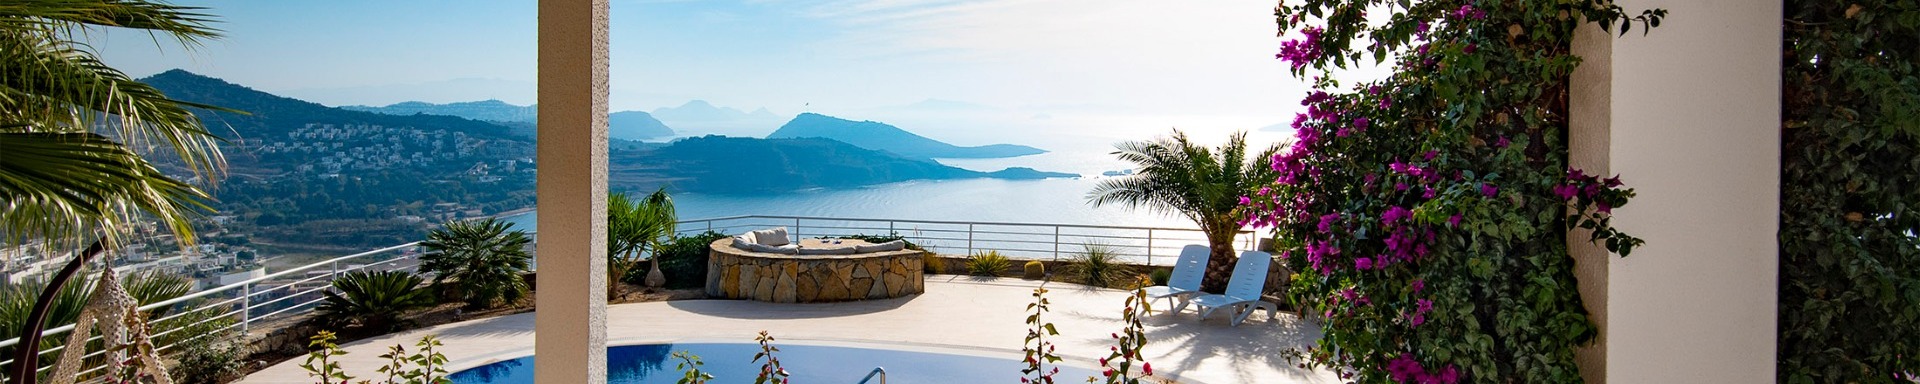 Luxury holiday villas for rent Bodrum with sea views